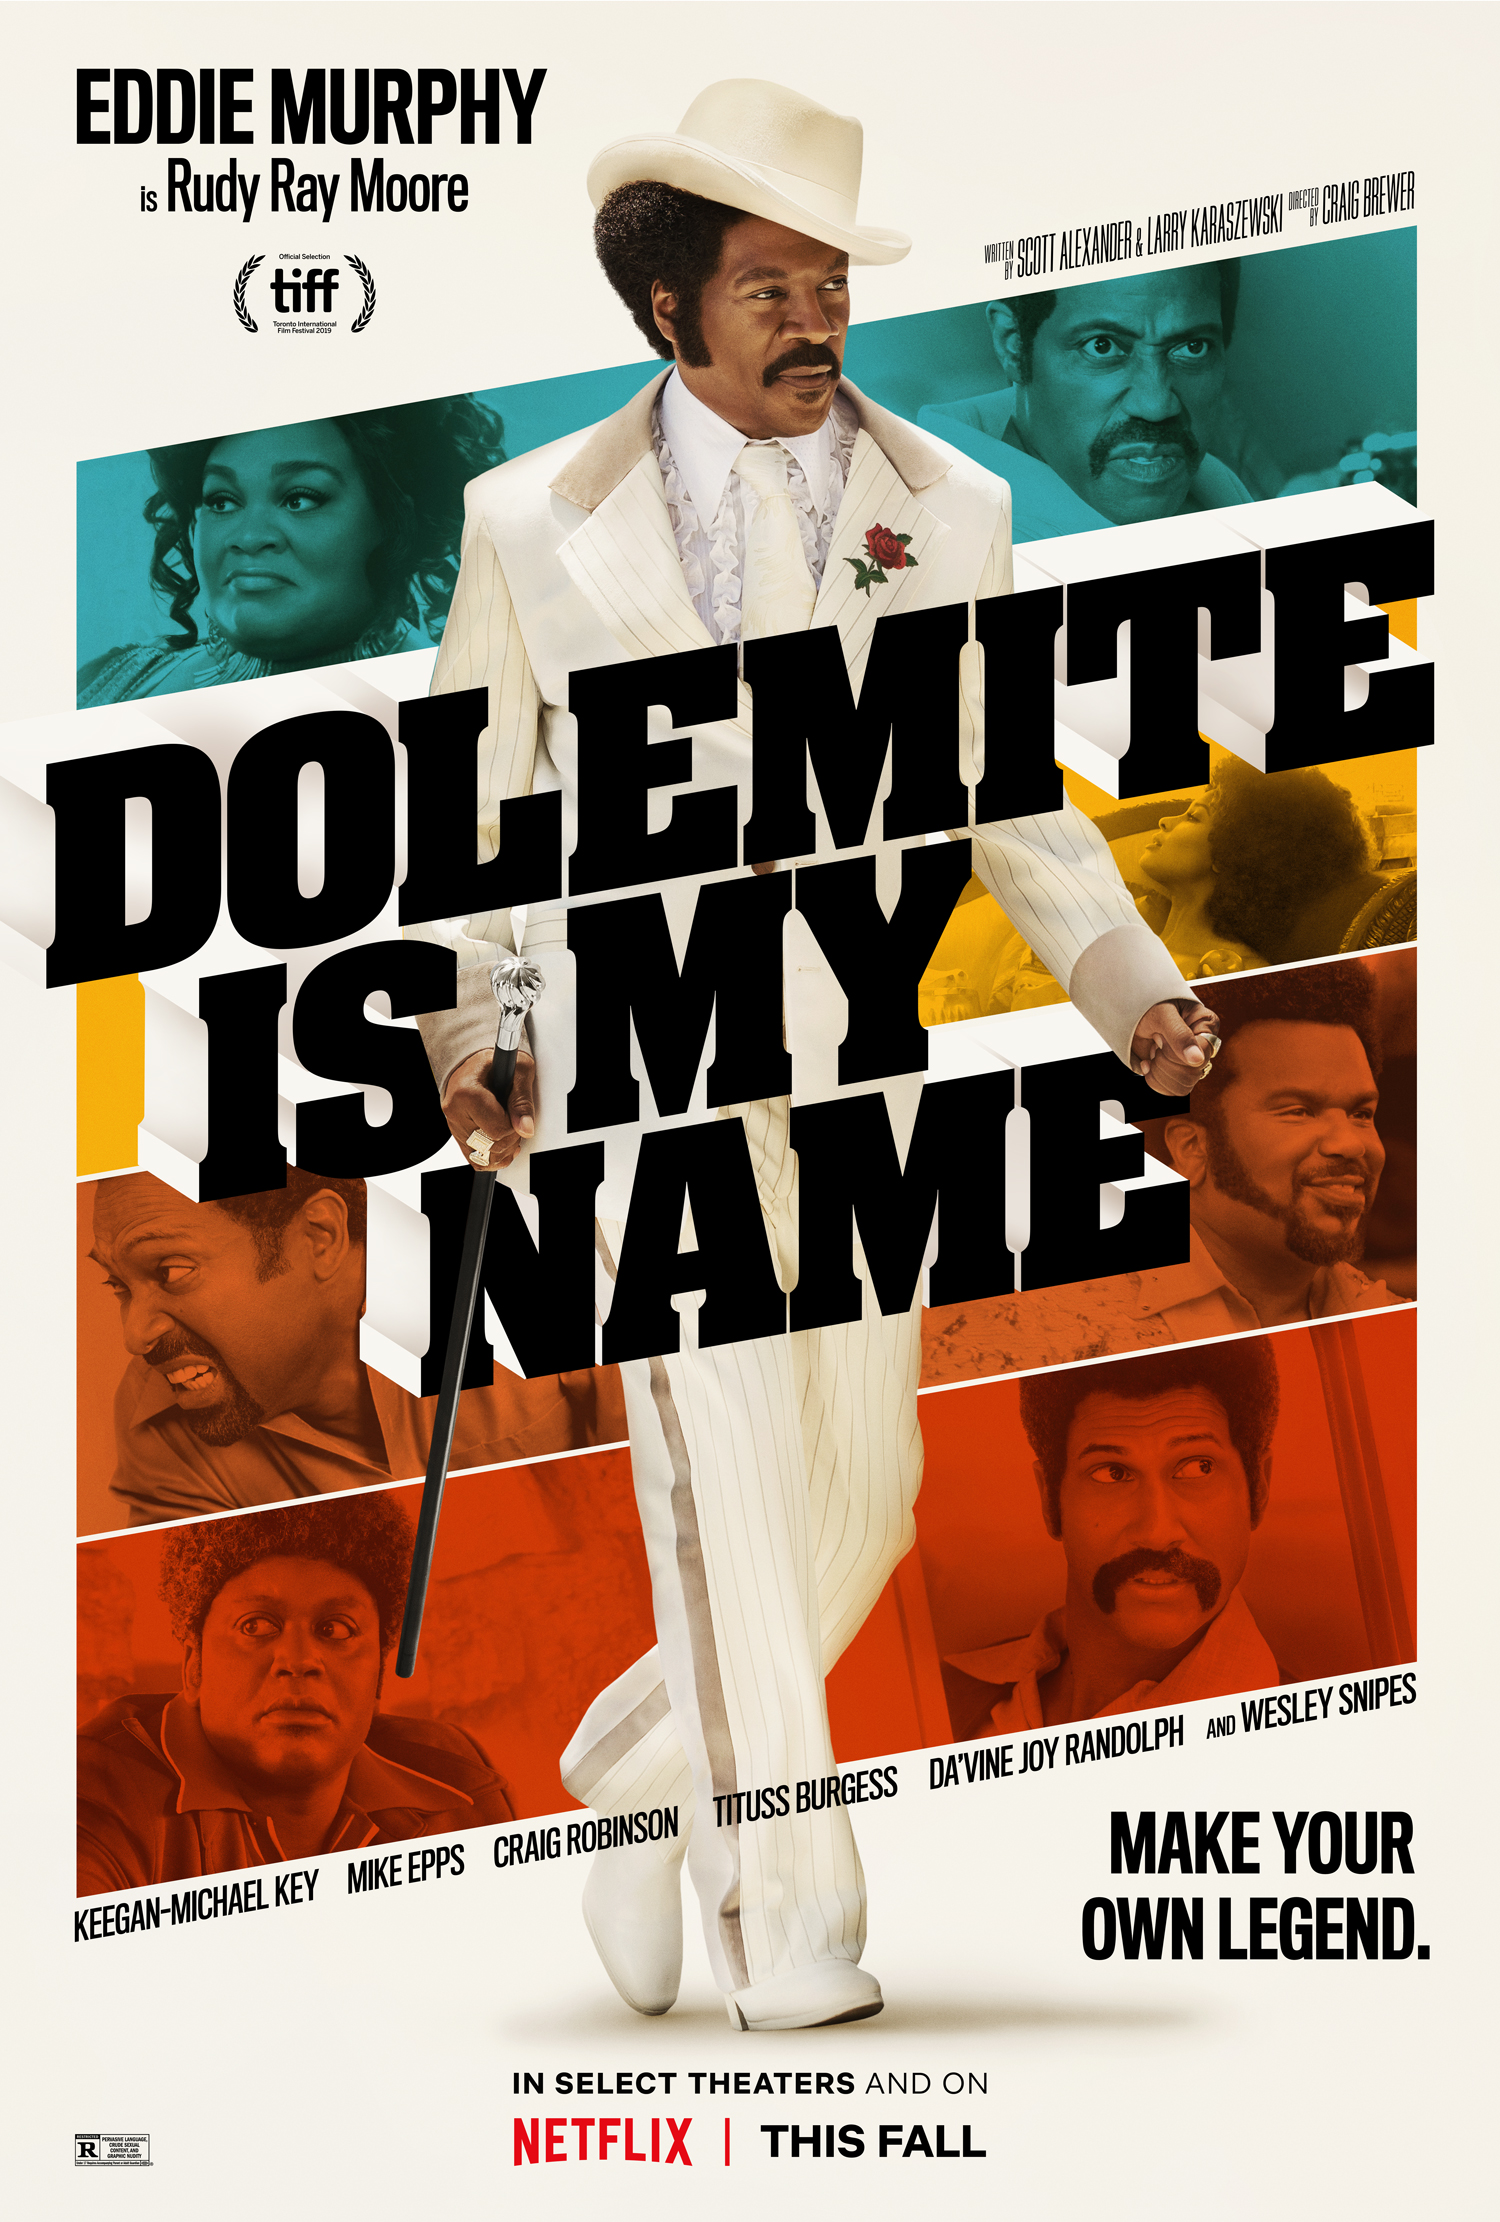 Here Is The First Trailer For Netflix Original 'Dolemite Is My Name'